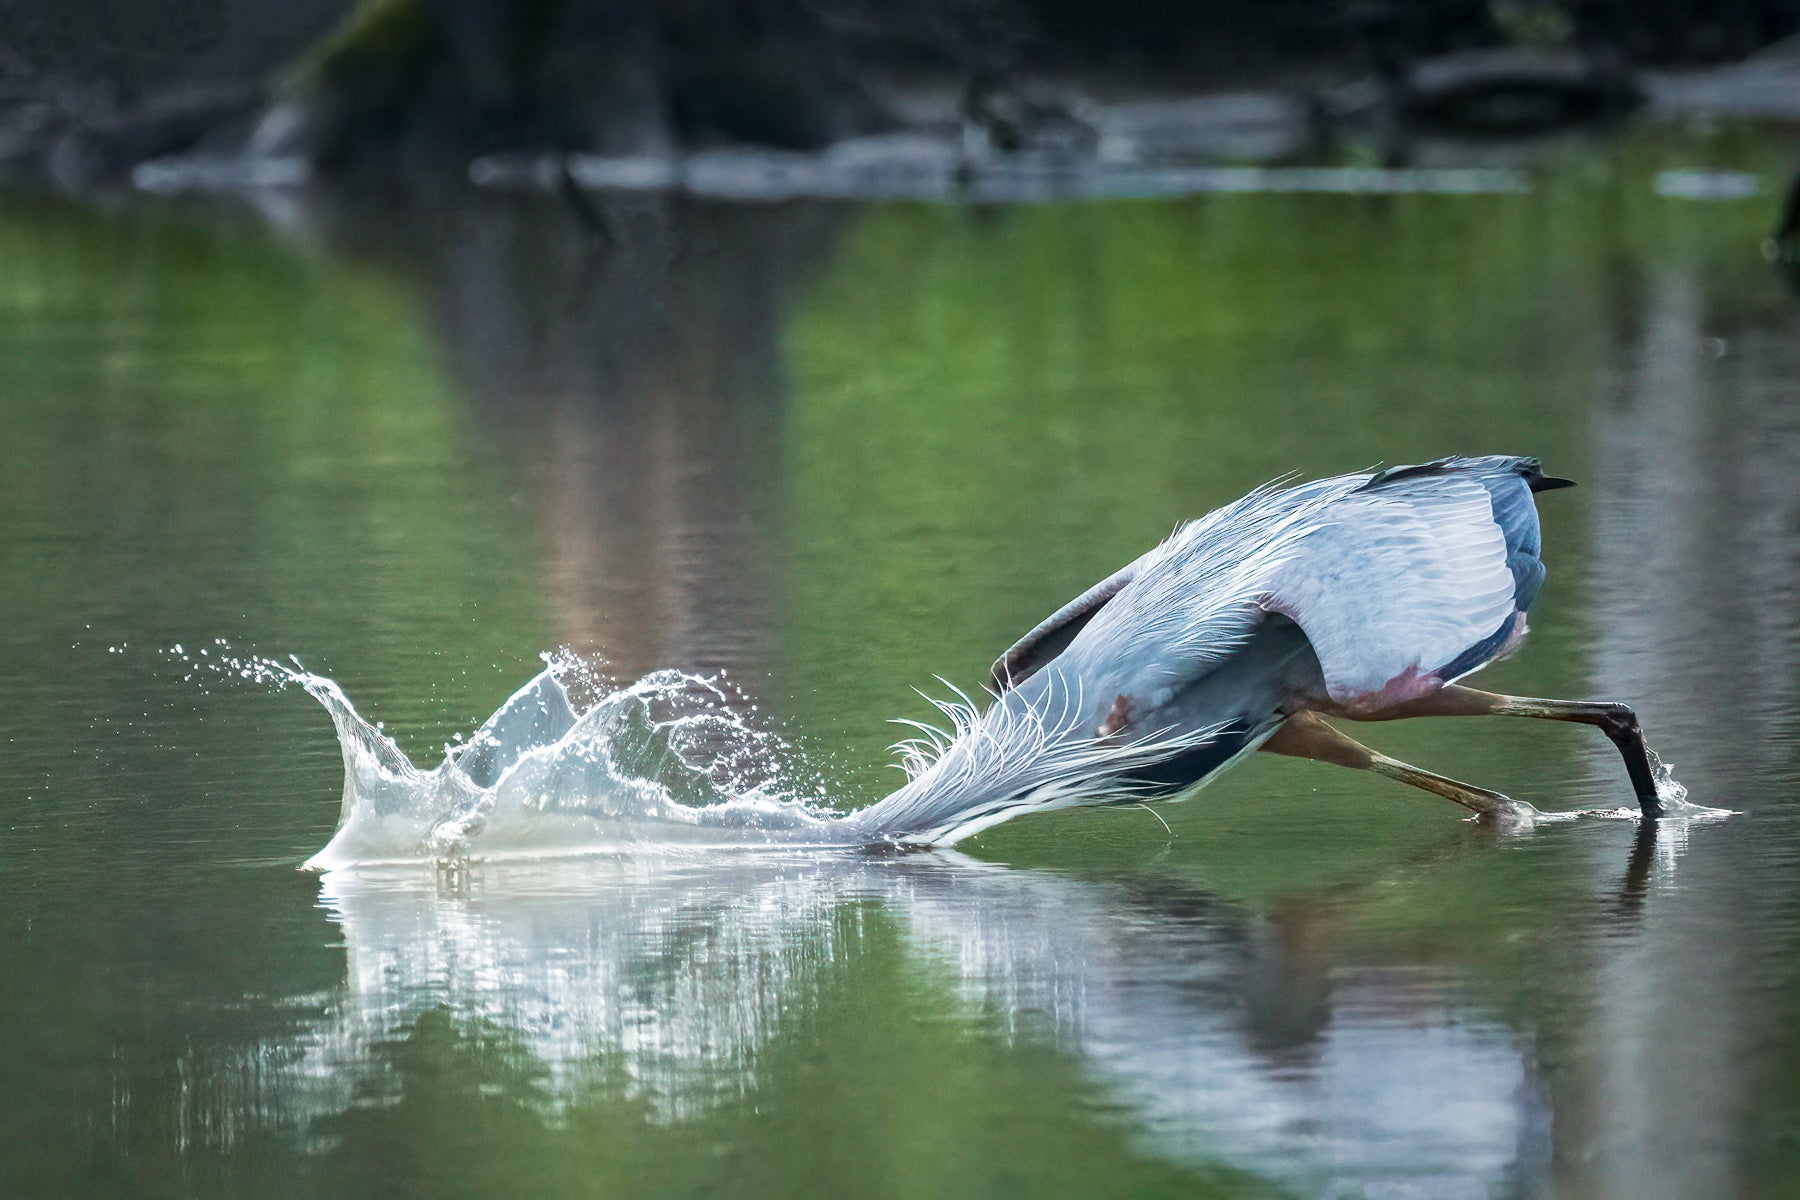 heron diving into water for fish